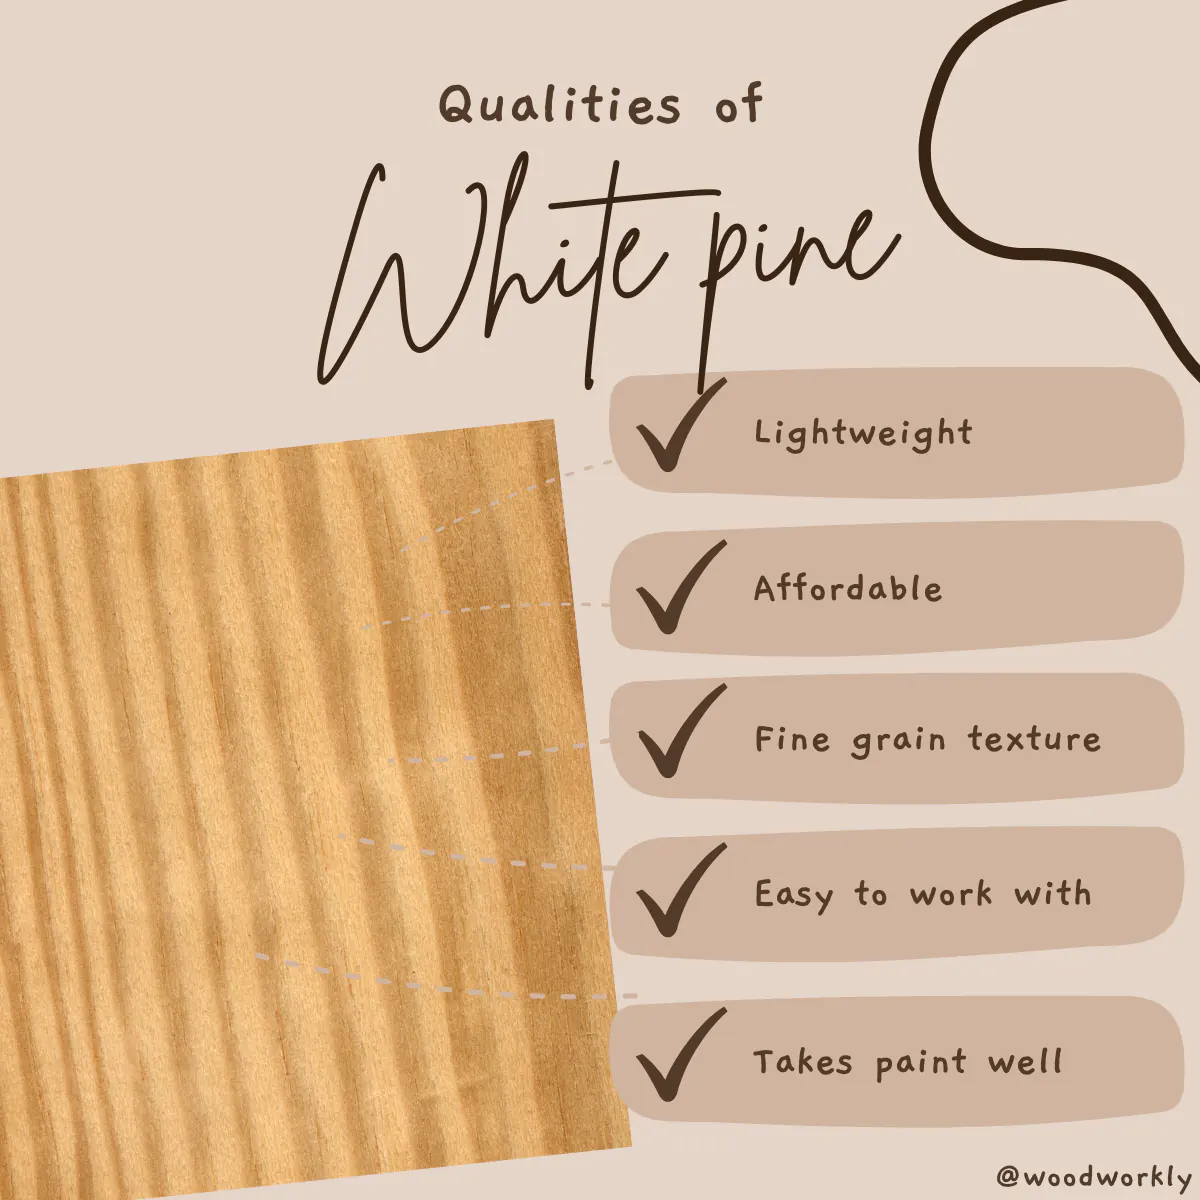 Qualities of White pine wood important when making a bed frame